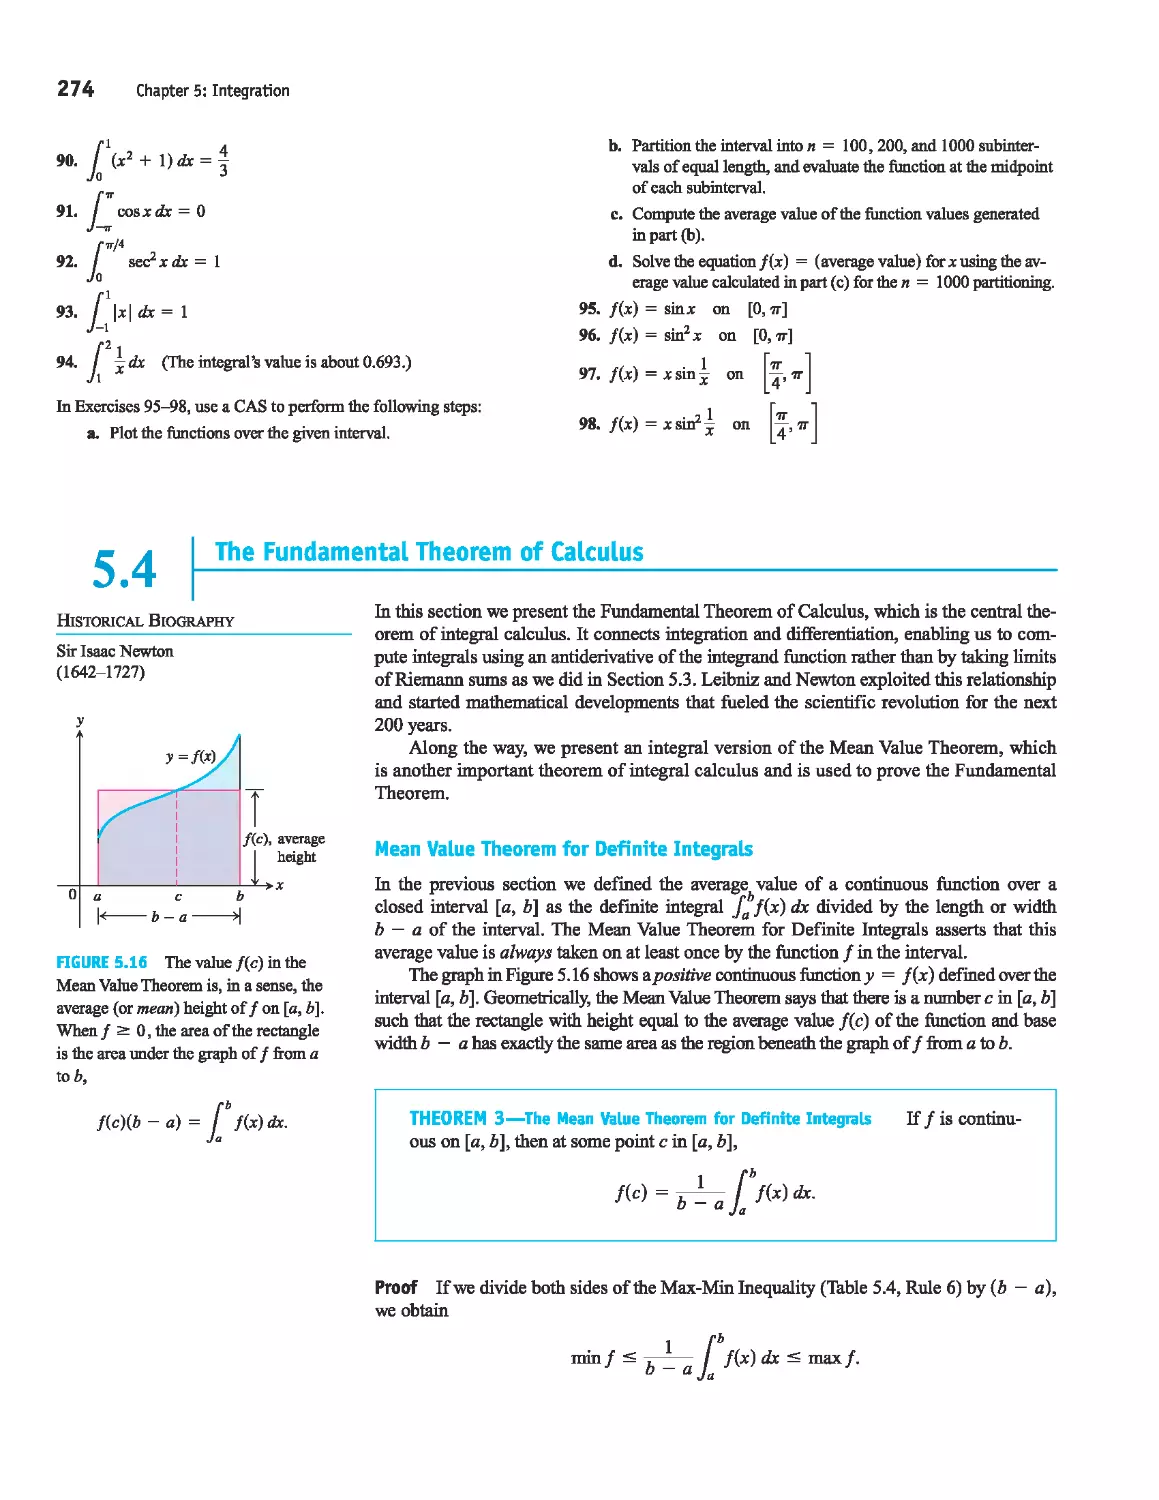 5.4 - The Fundamental Theorem of Calculus